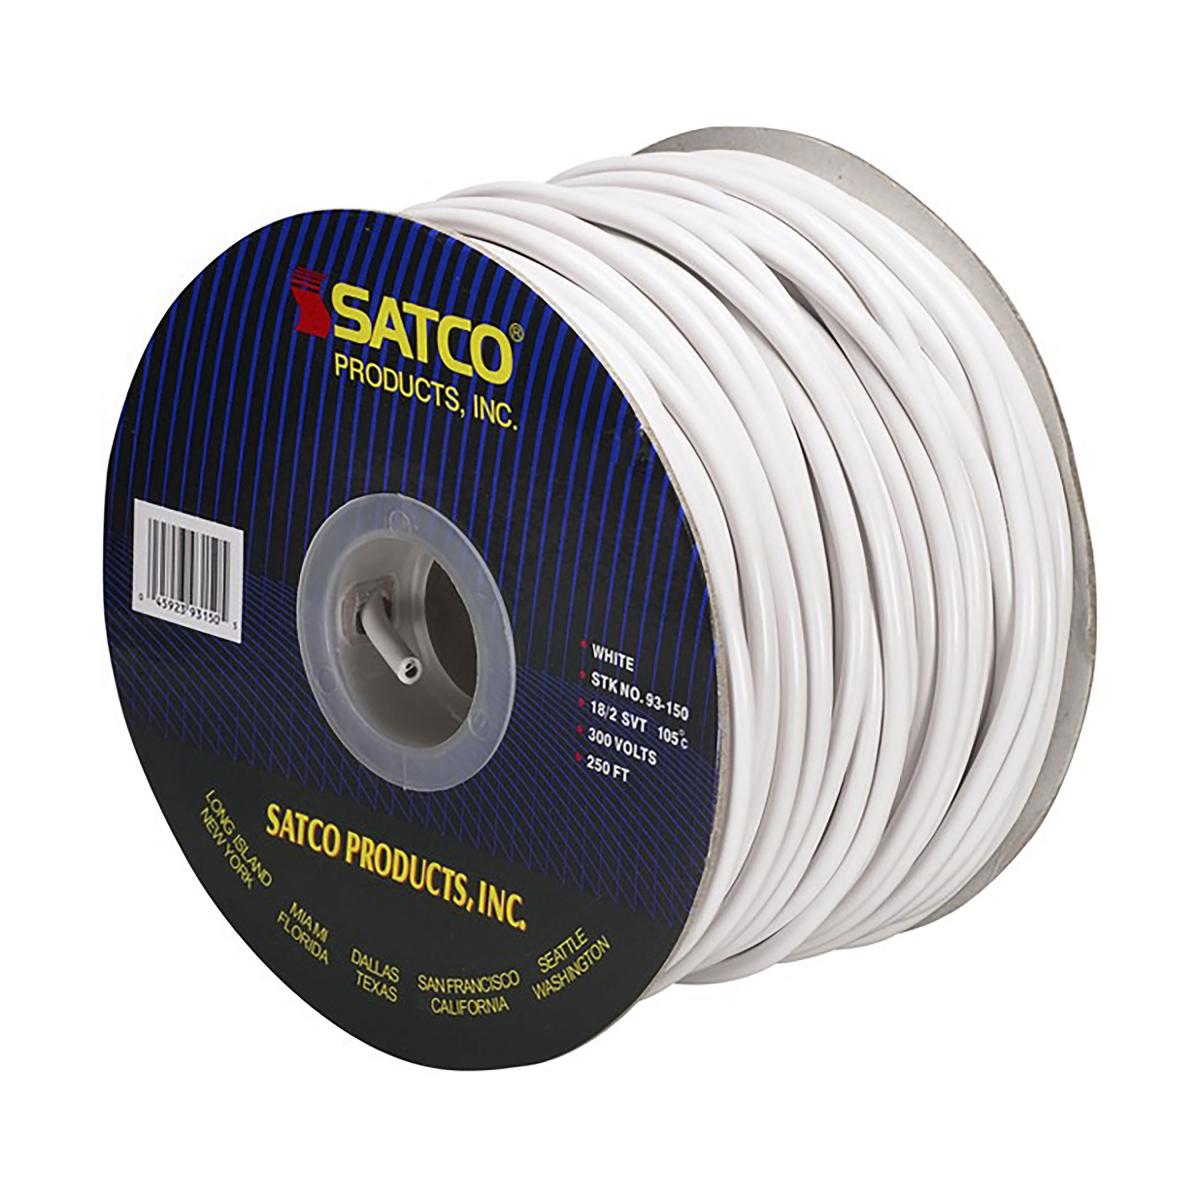 Satco 93-150 Pulley Bulk Wire 18/2 SVT 105C Pulley Cord 250 Foot/Spool White